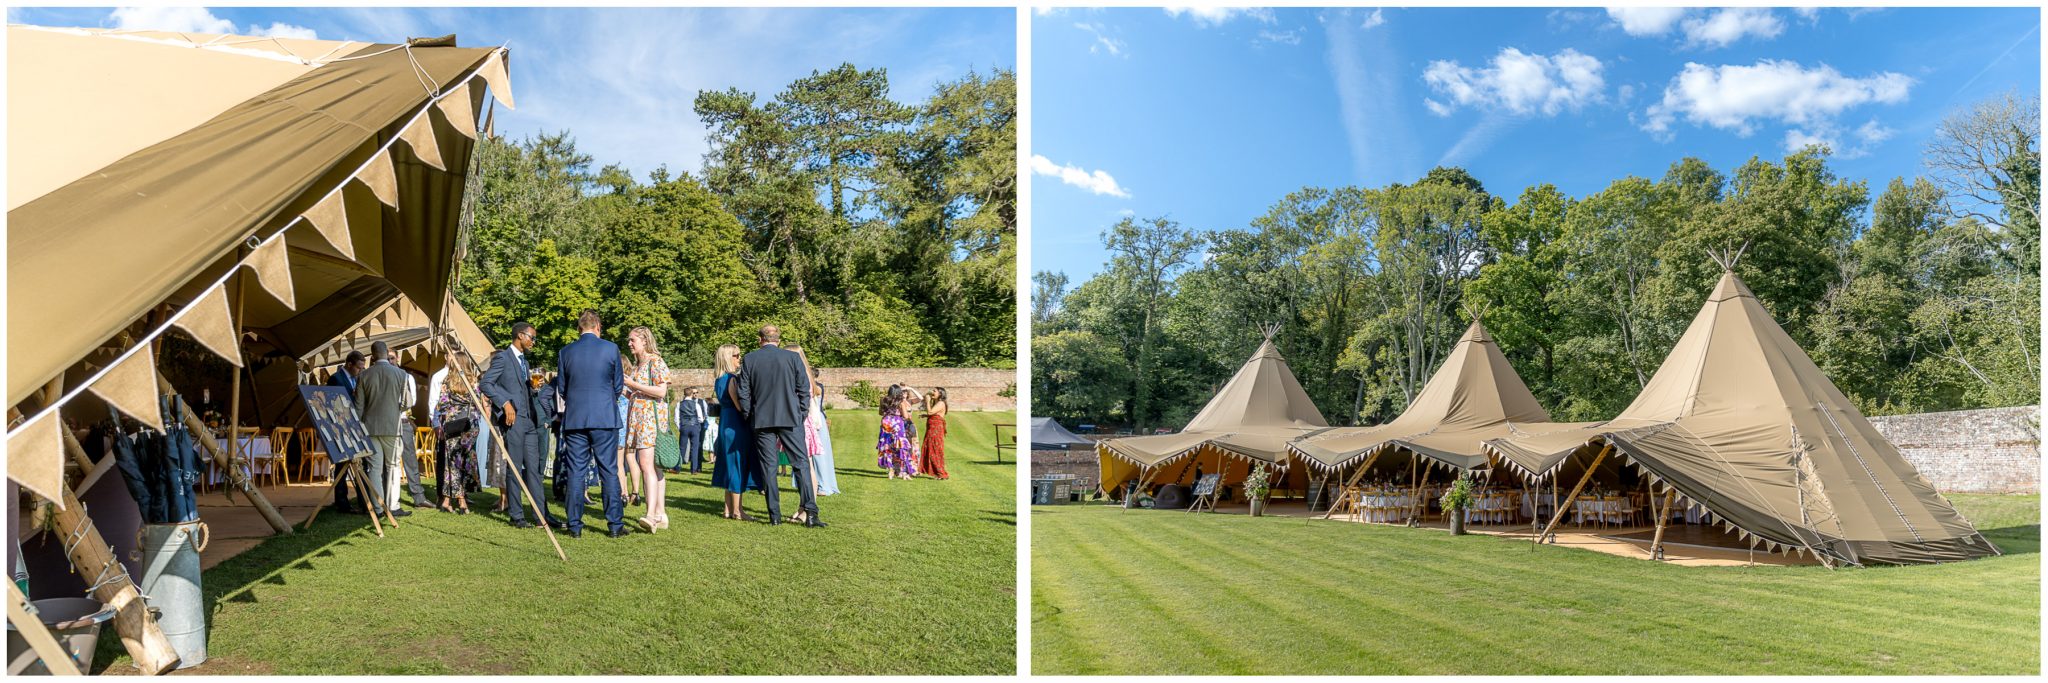 The marquee tent set up in the walled garden of the Holywell Estate